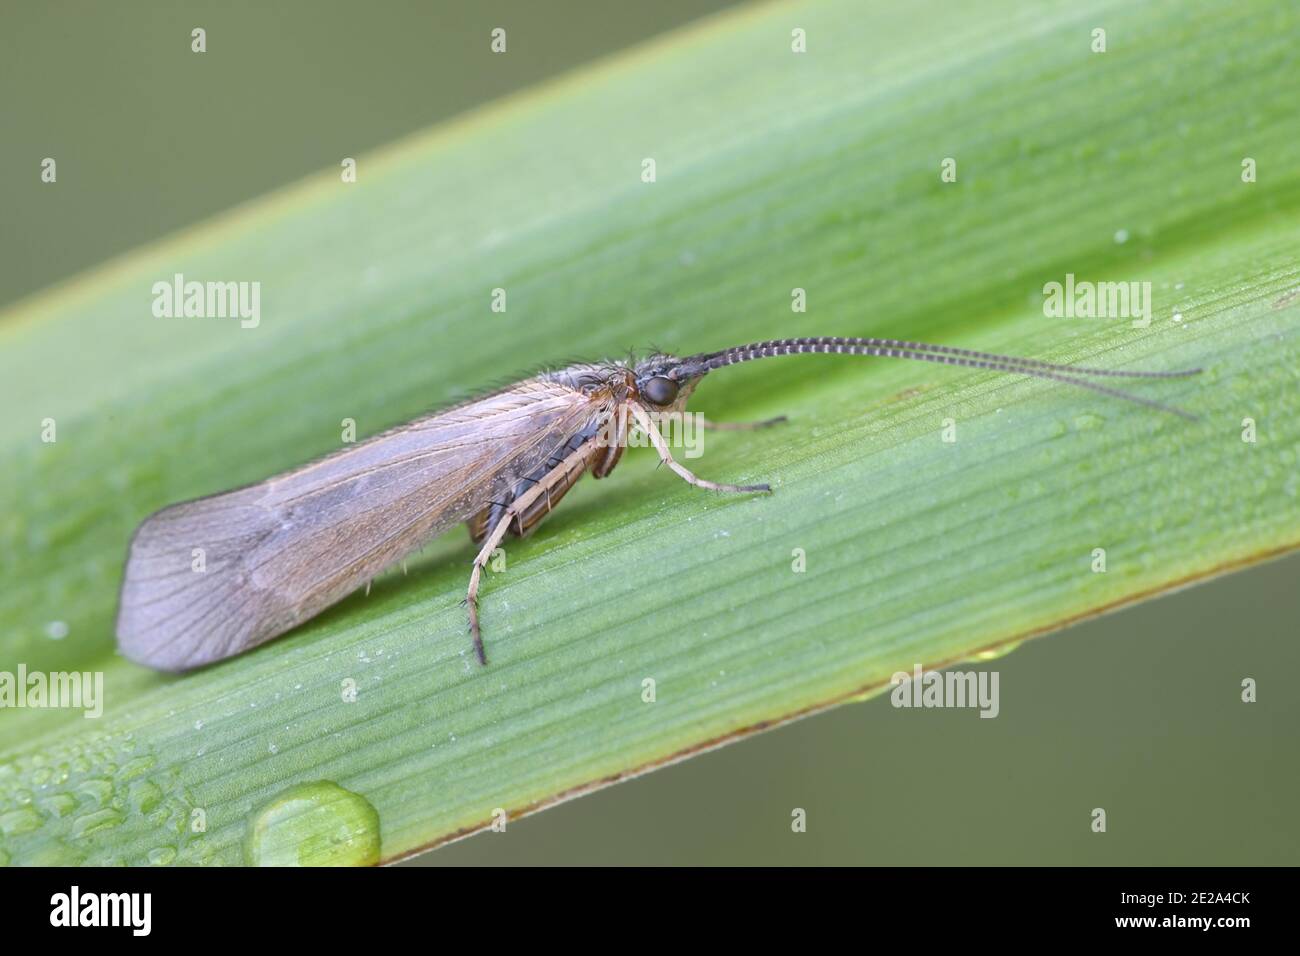 Limnephilus affinis, a caddisfly from Finland with no common english name Stock Photo